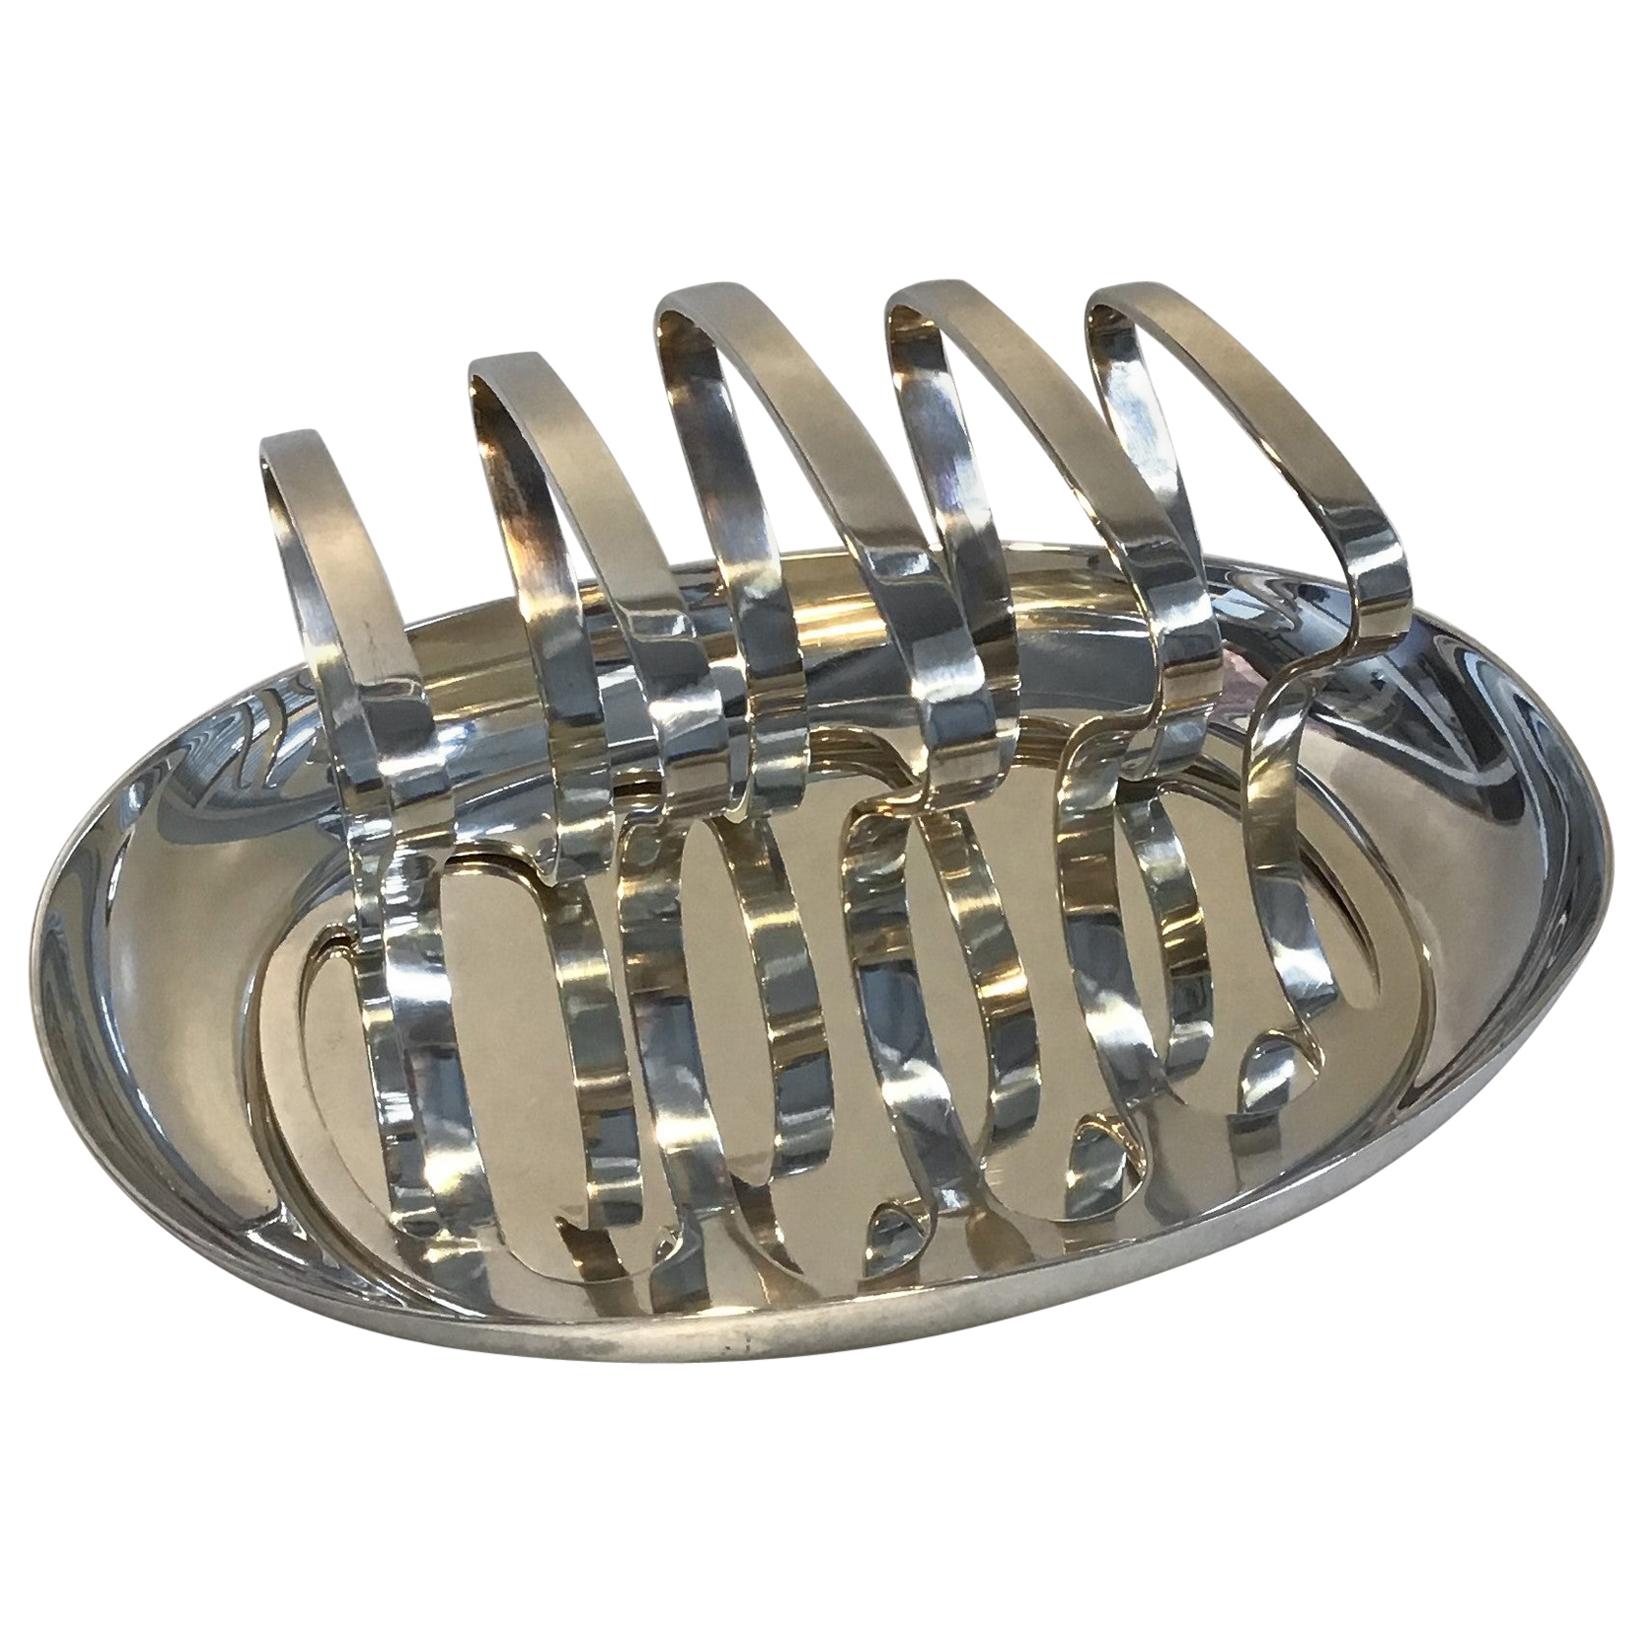 Georg Jensen Sterling Silver Toast Rack and Tray No. 1183 For Sale